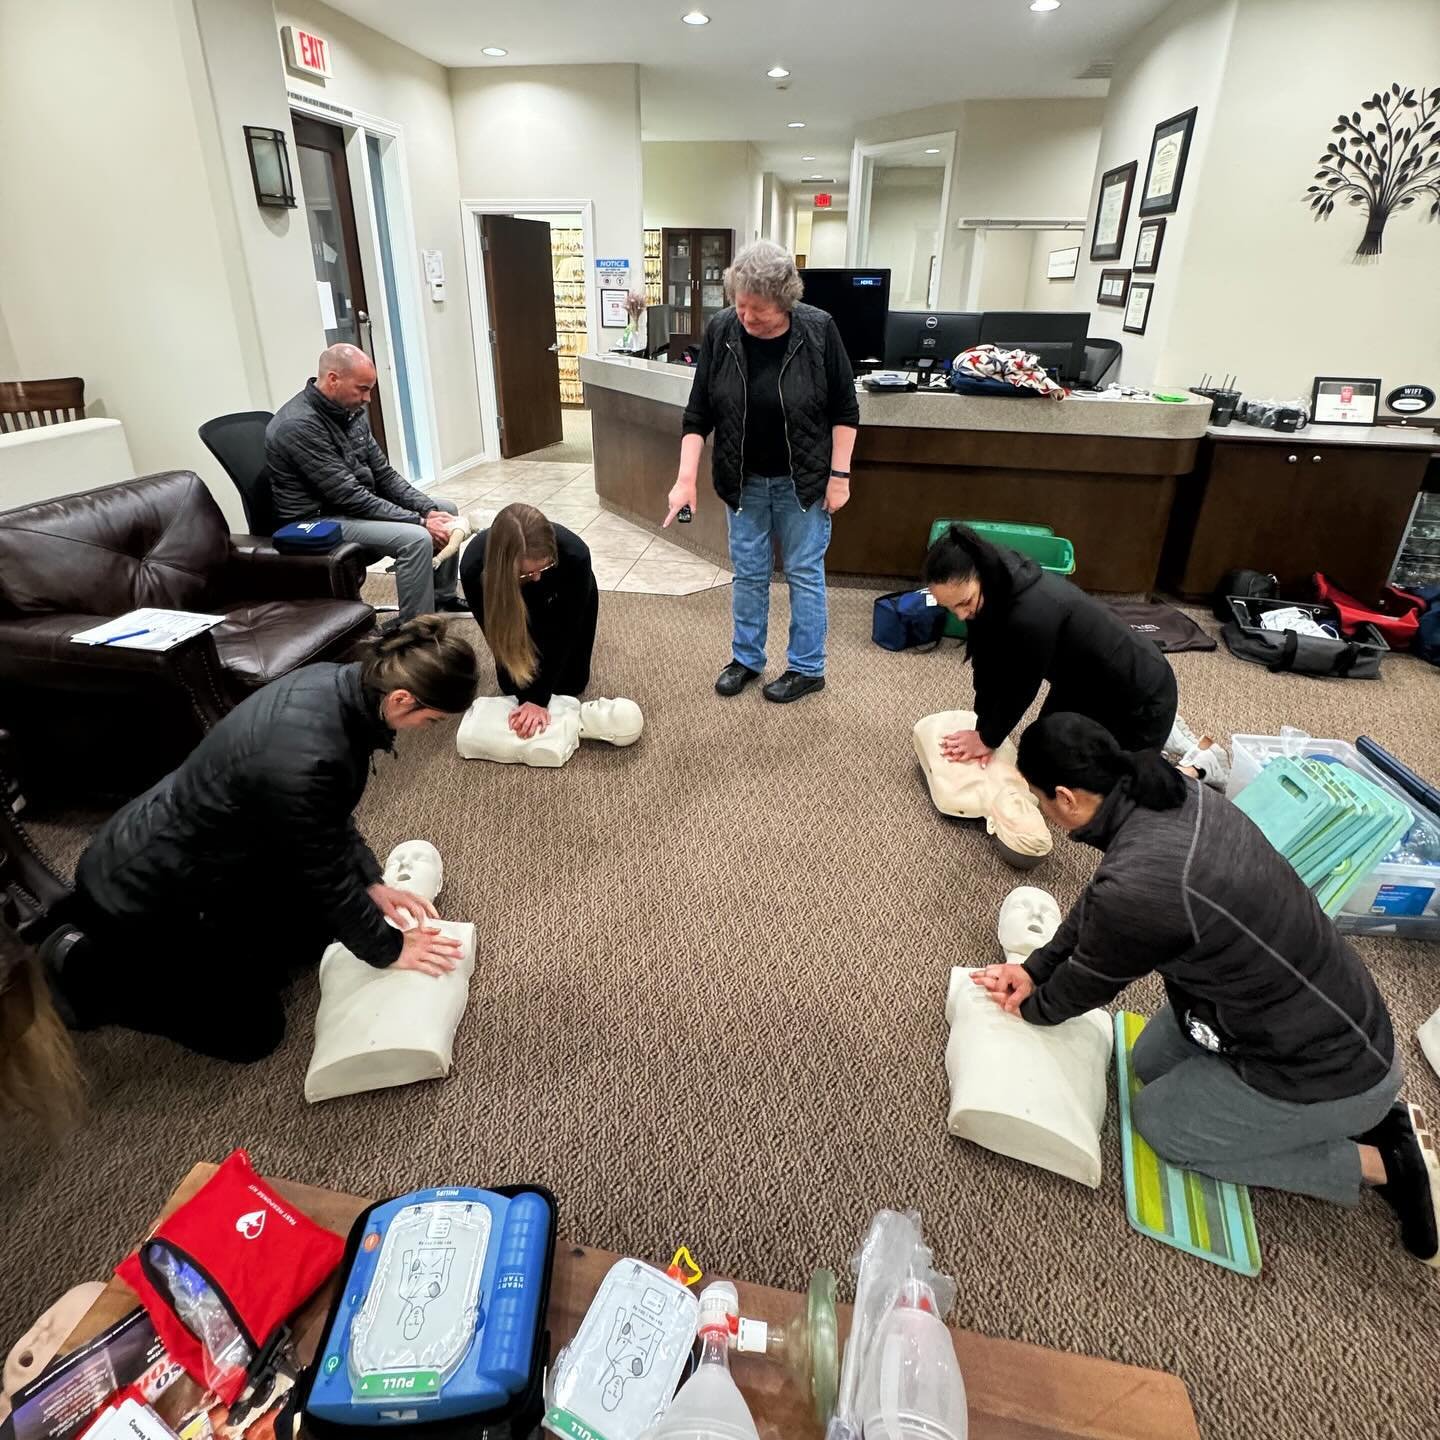 The team had a great training session reviewing and refreshing our CPR knowledge! 

Making sure we know how to take care of our patients and each other beyond any dental needs is not only important, but it can also be fun! 

#dentistry #mcminnville #